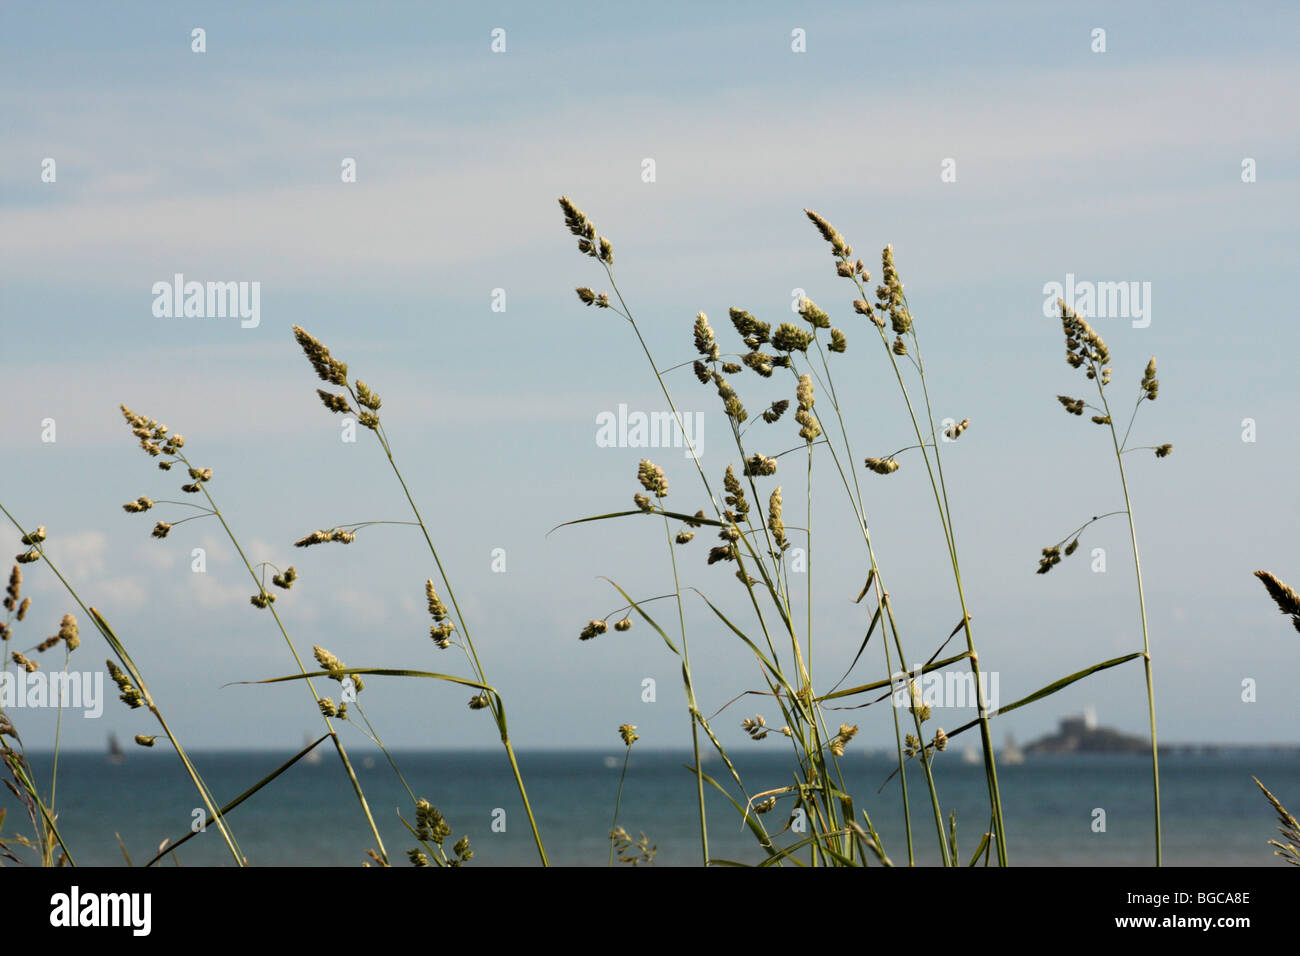 Wild Grasses waving in the summer breeze on Swansea seafront, with Mumbles in the background, West Glamorgan, South Wales, U.K. Stock Photo